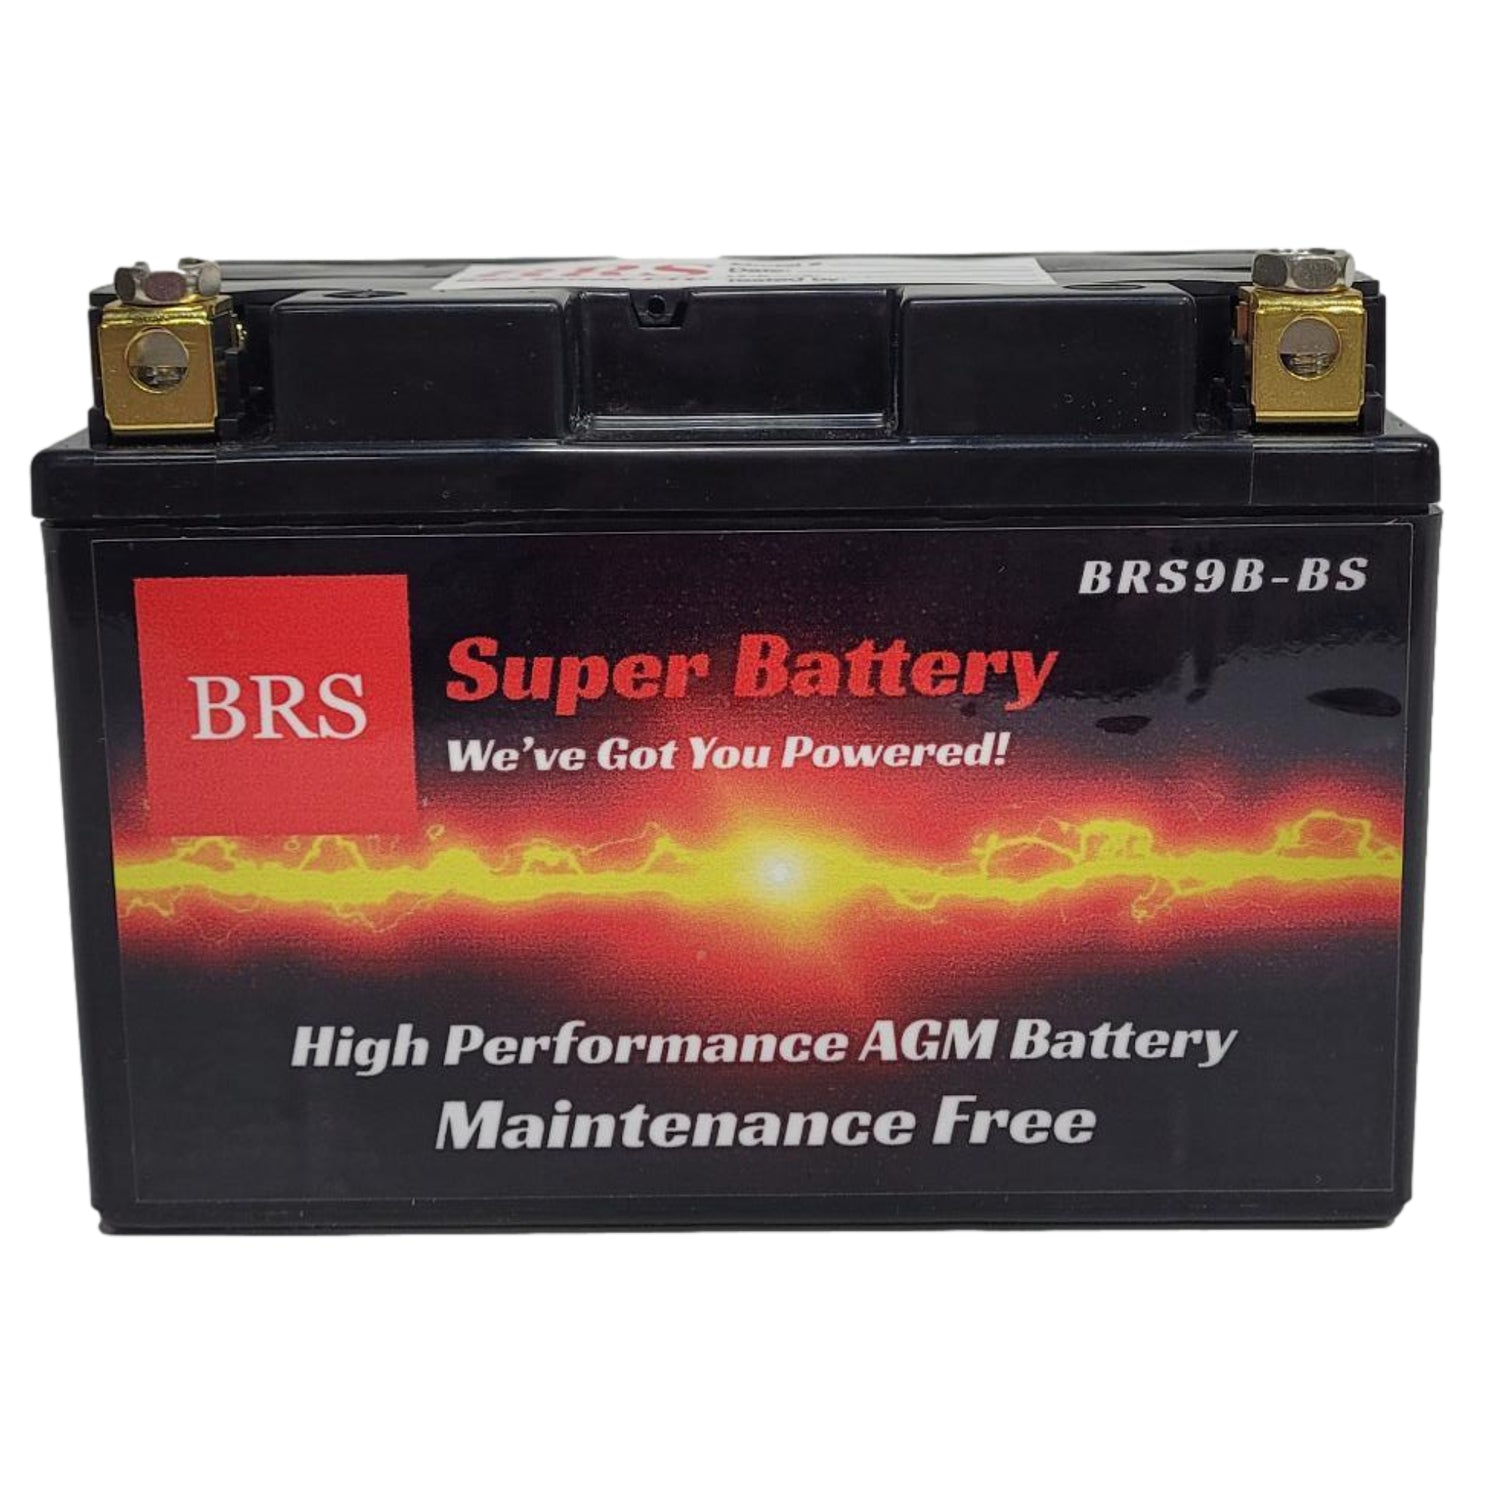 WPX9B-BS 12v High Performance Sealed AGM PowerSport 2 Year Battery - BRS Super Battery